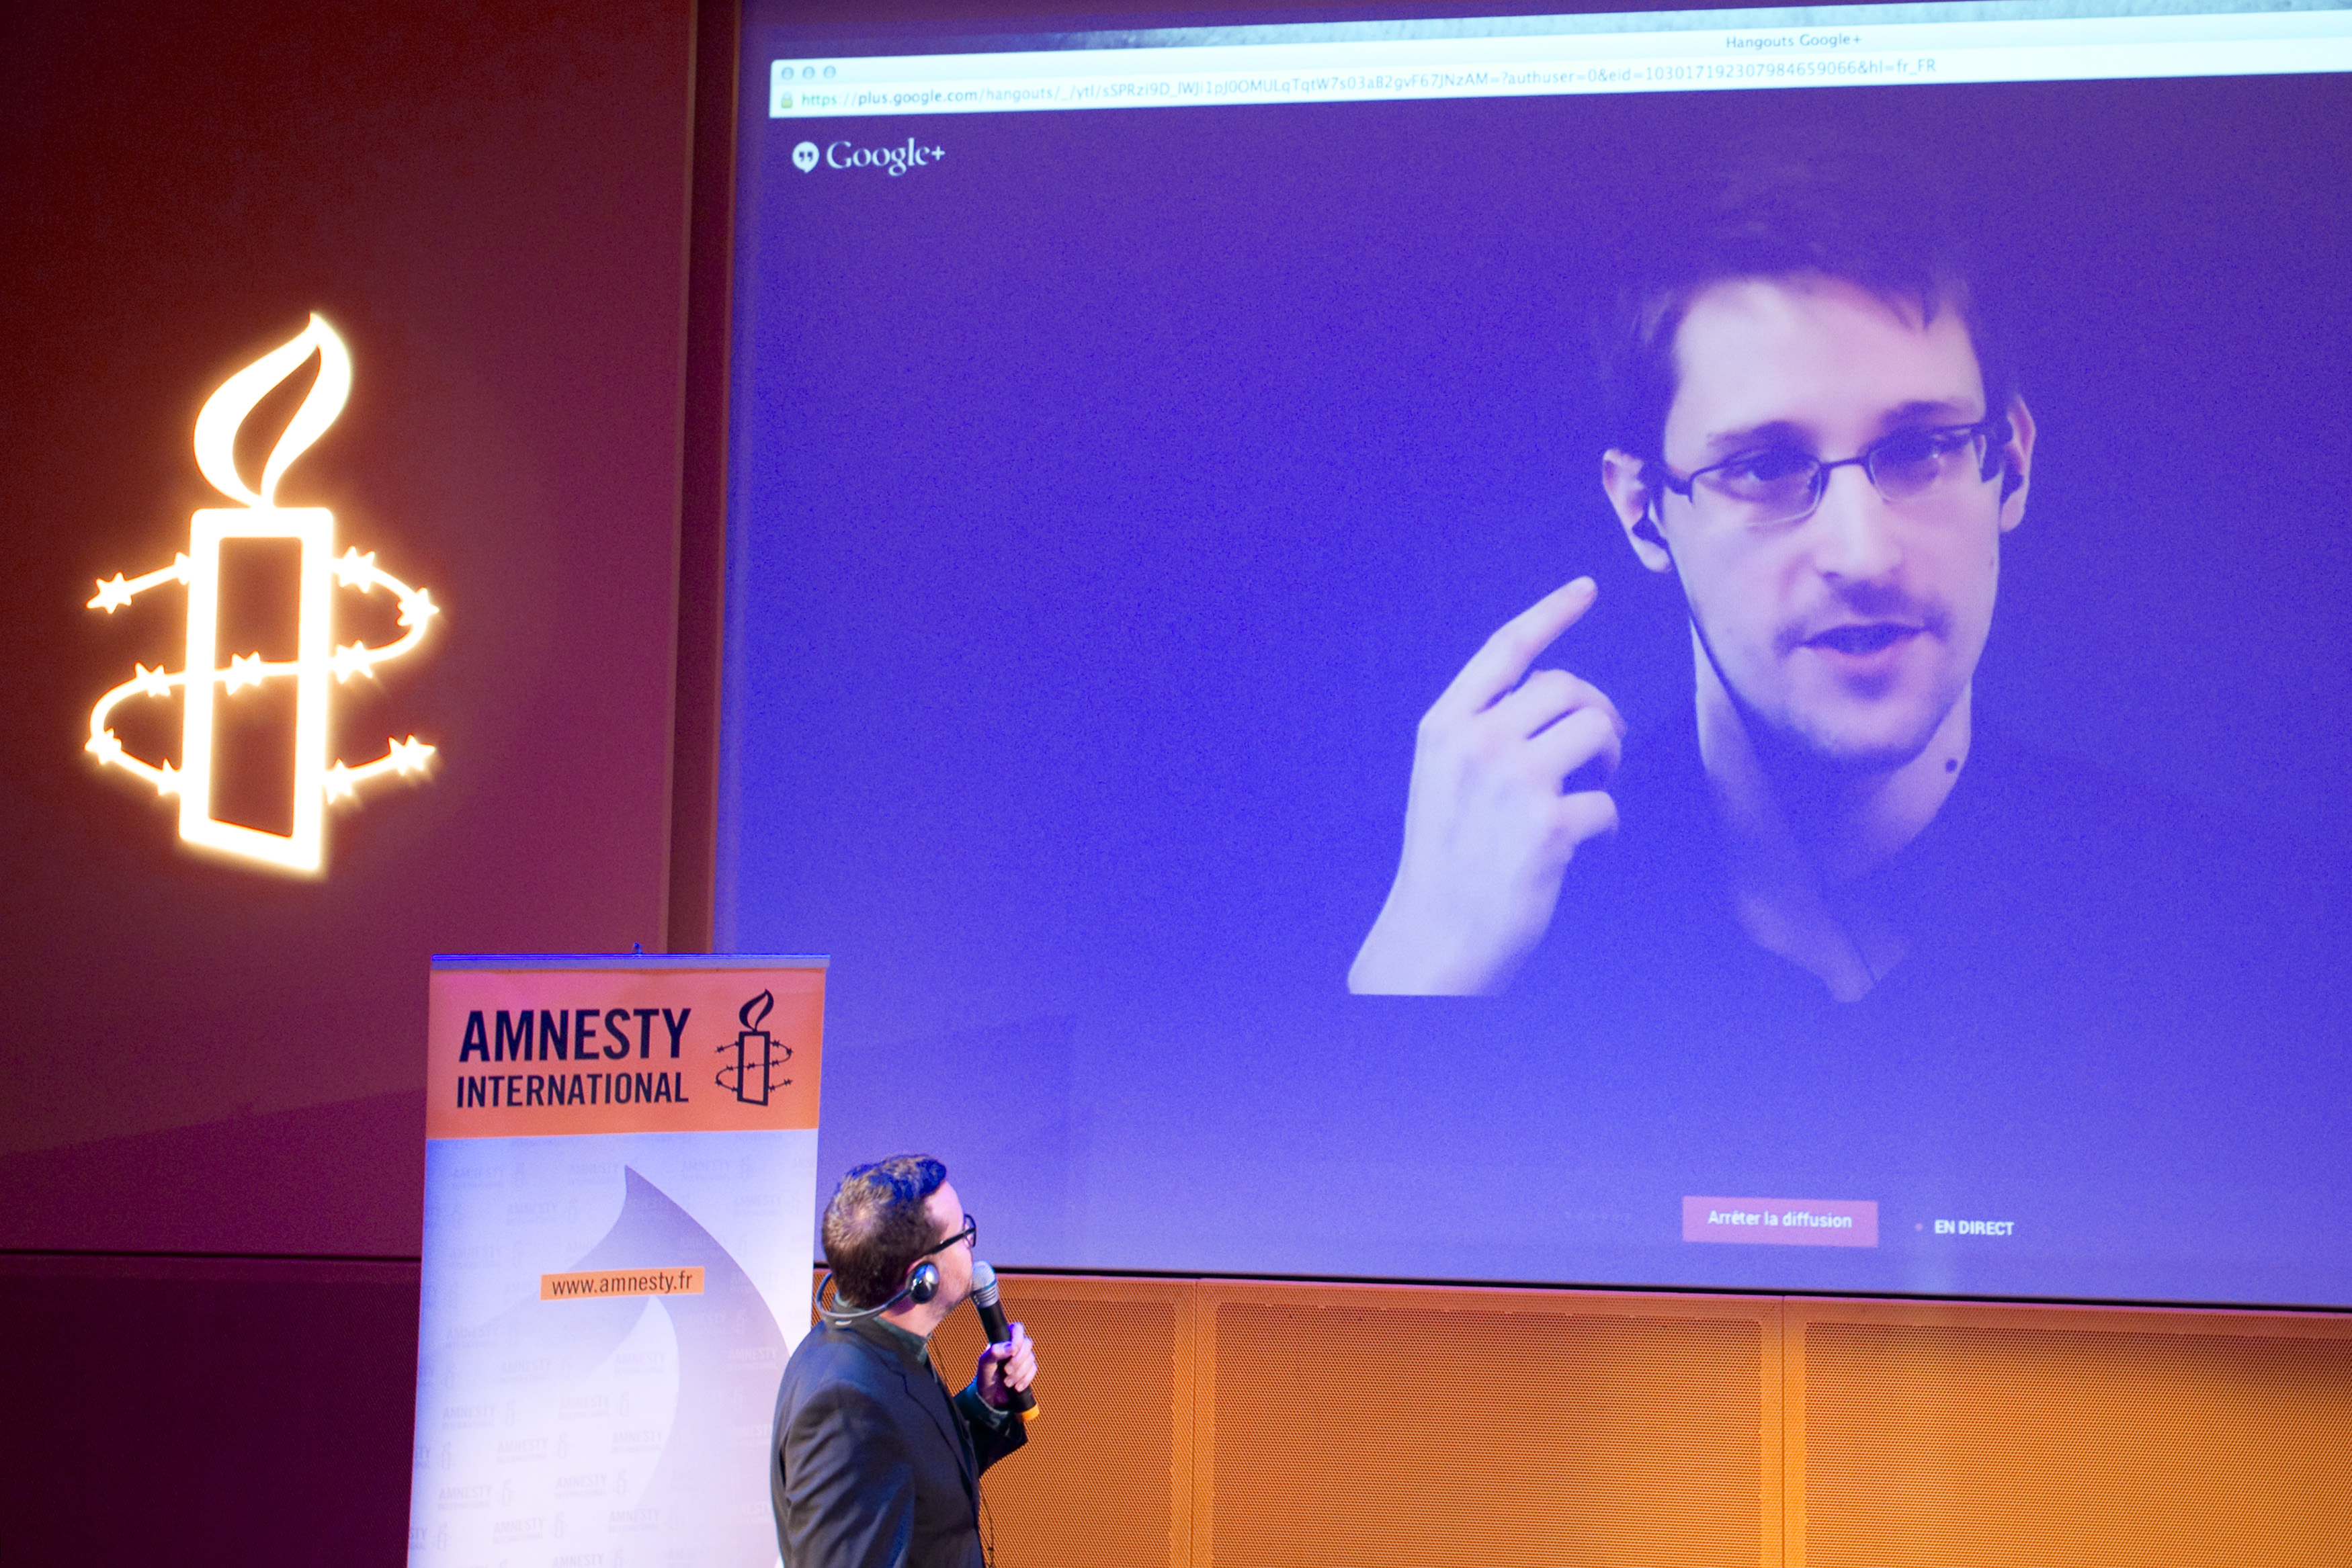 Former U.S. National Security Agency contractor Edward Snowden, who is in Moscow, is seen on a giant screen during a live video conference for an interview as part of Amnesty International's annual Write for Rights campaign at the Gaite Lyrique in Paris December 10, 2014 (Charles Platiau—Reuters)